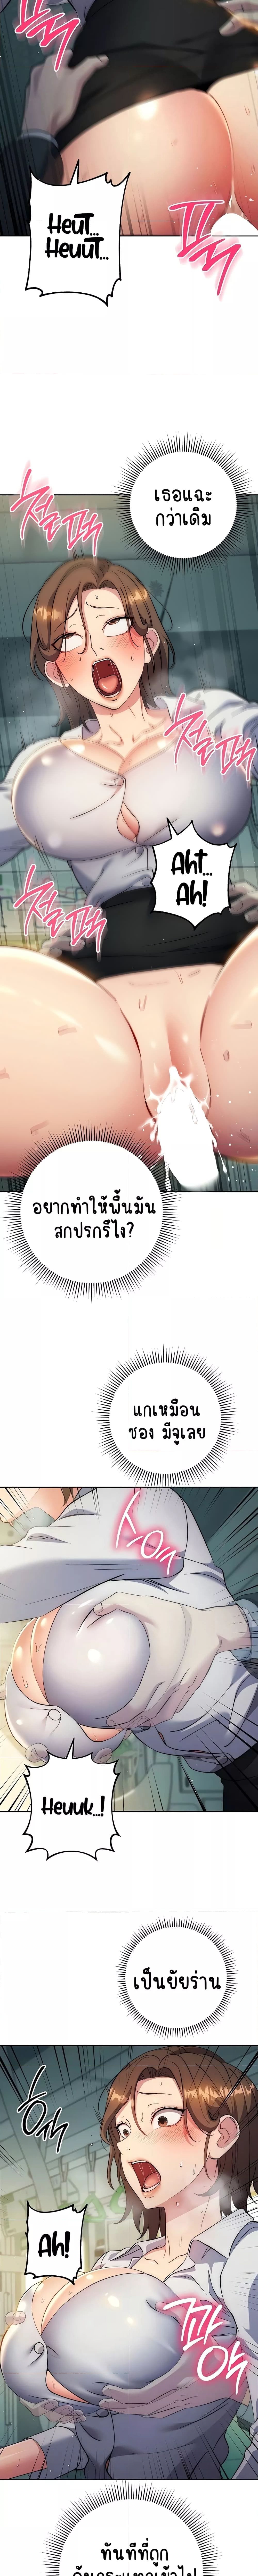 Outsider: The Invisible Man ตอนที่ 10 ภาพ 10